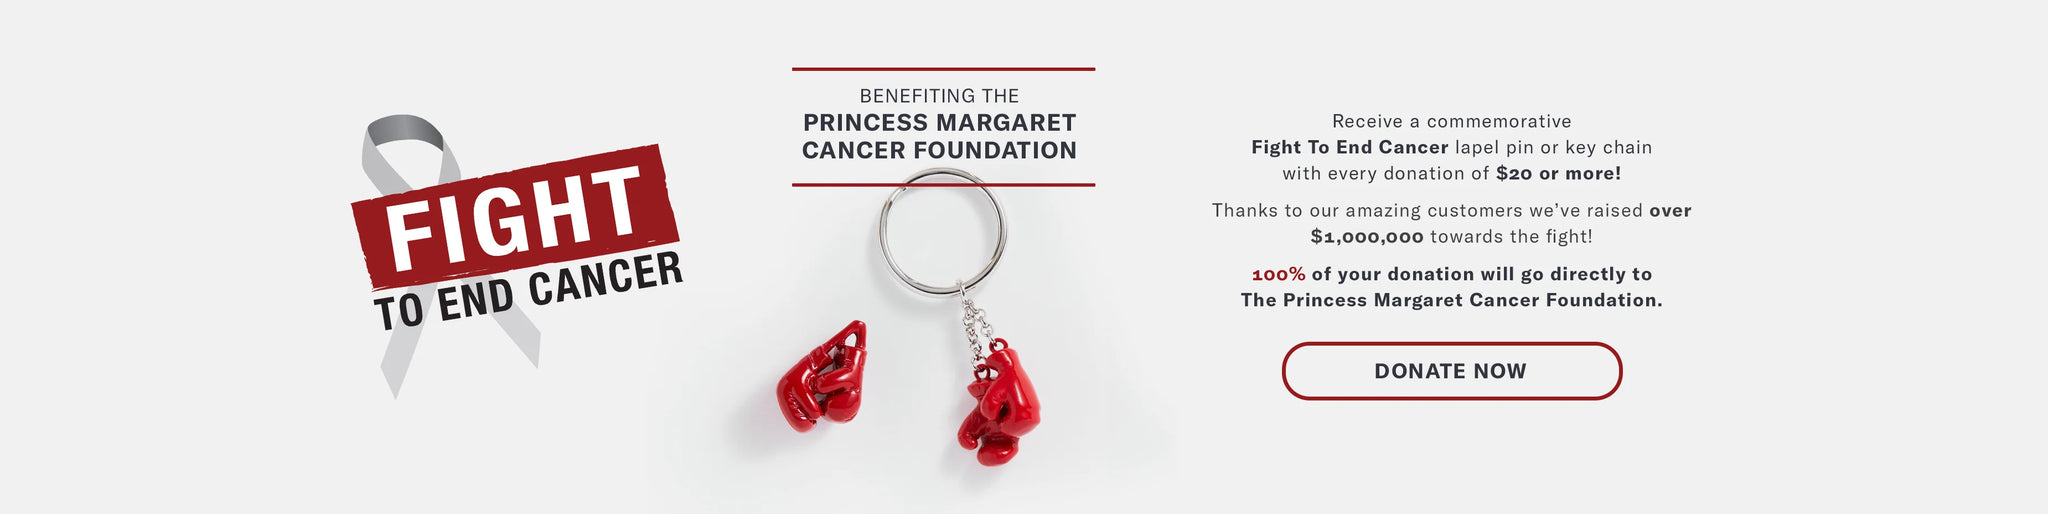 Donate to Fight to End Cancer - Princess Margaret Cancer Foundation | George Richards